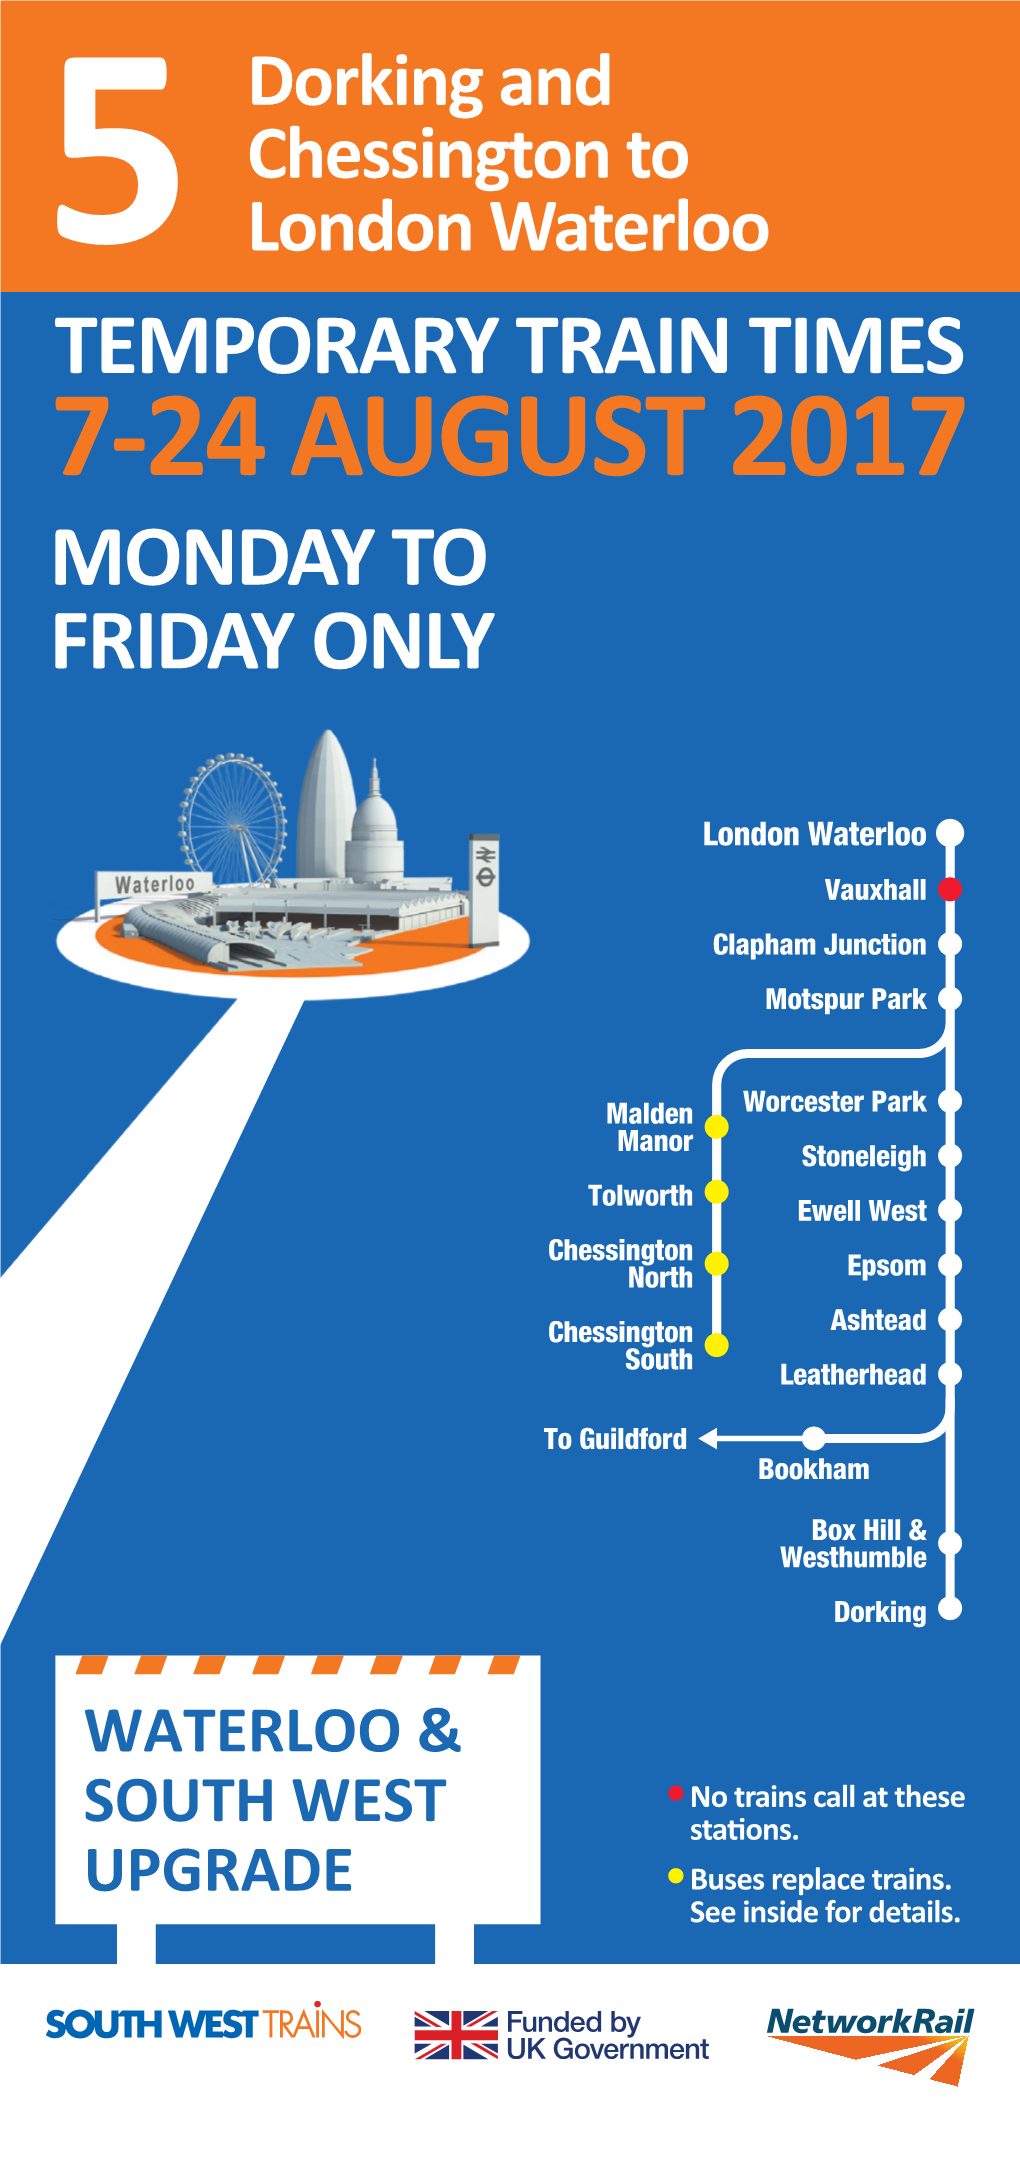 Temporary Train Times 7-24 August 2017 Monday to Friday Only